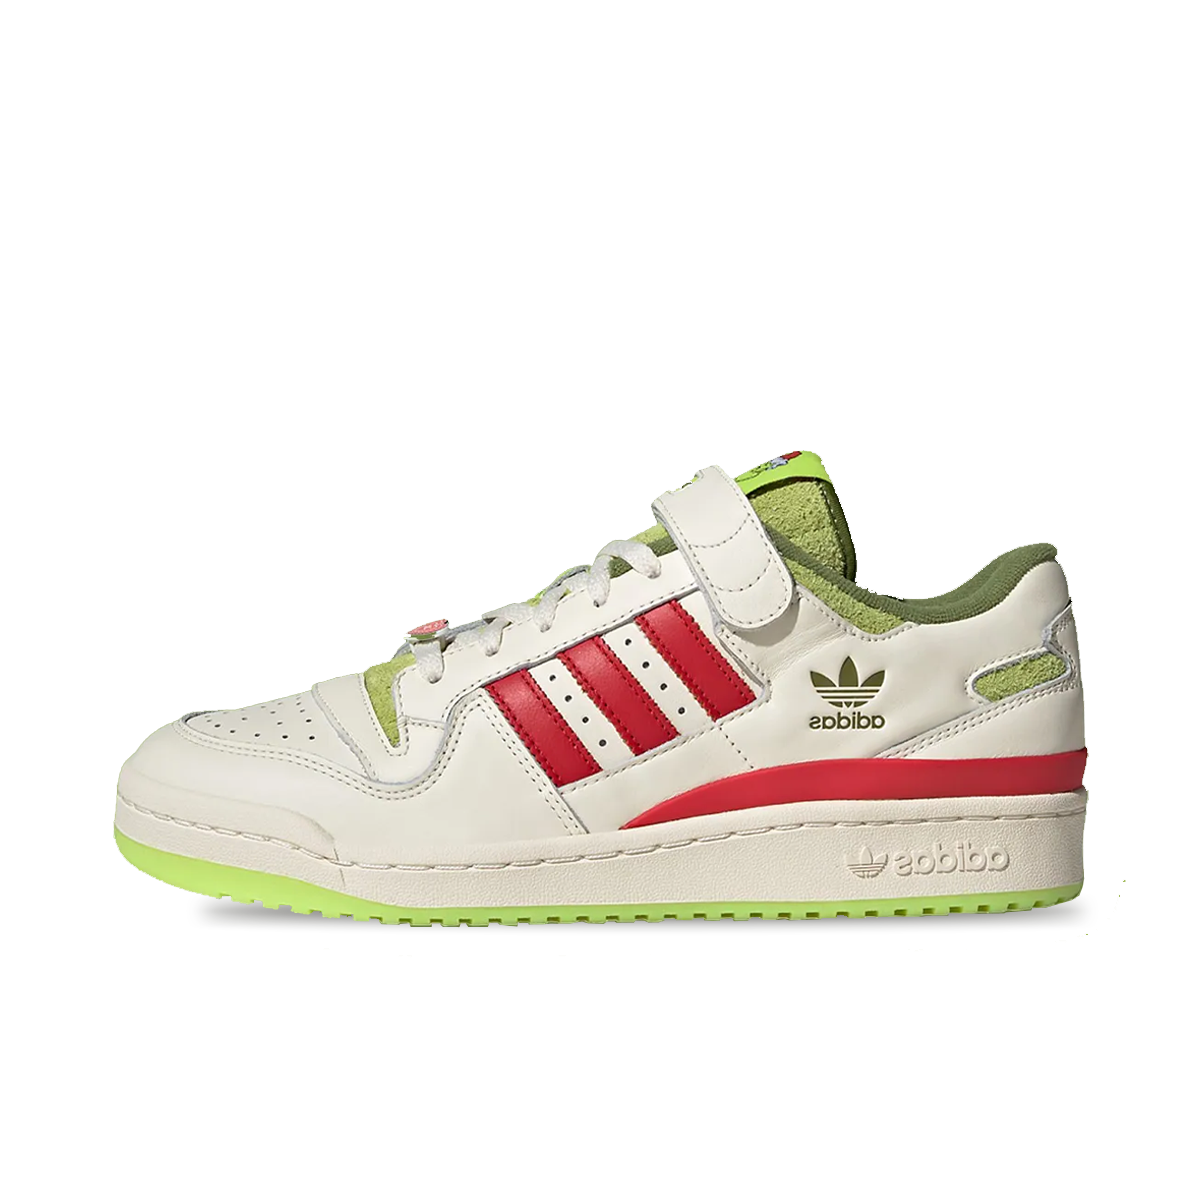 The Grinch x adidas Forum Low 'Green'